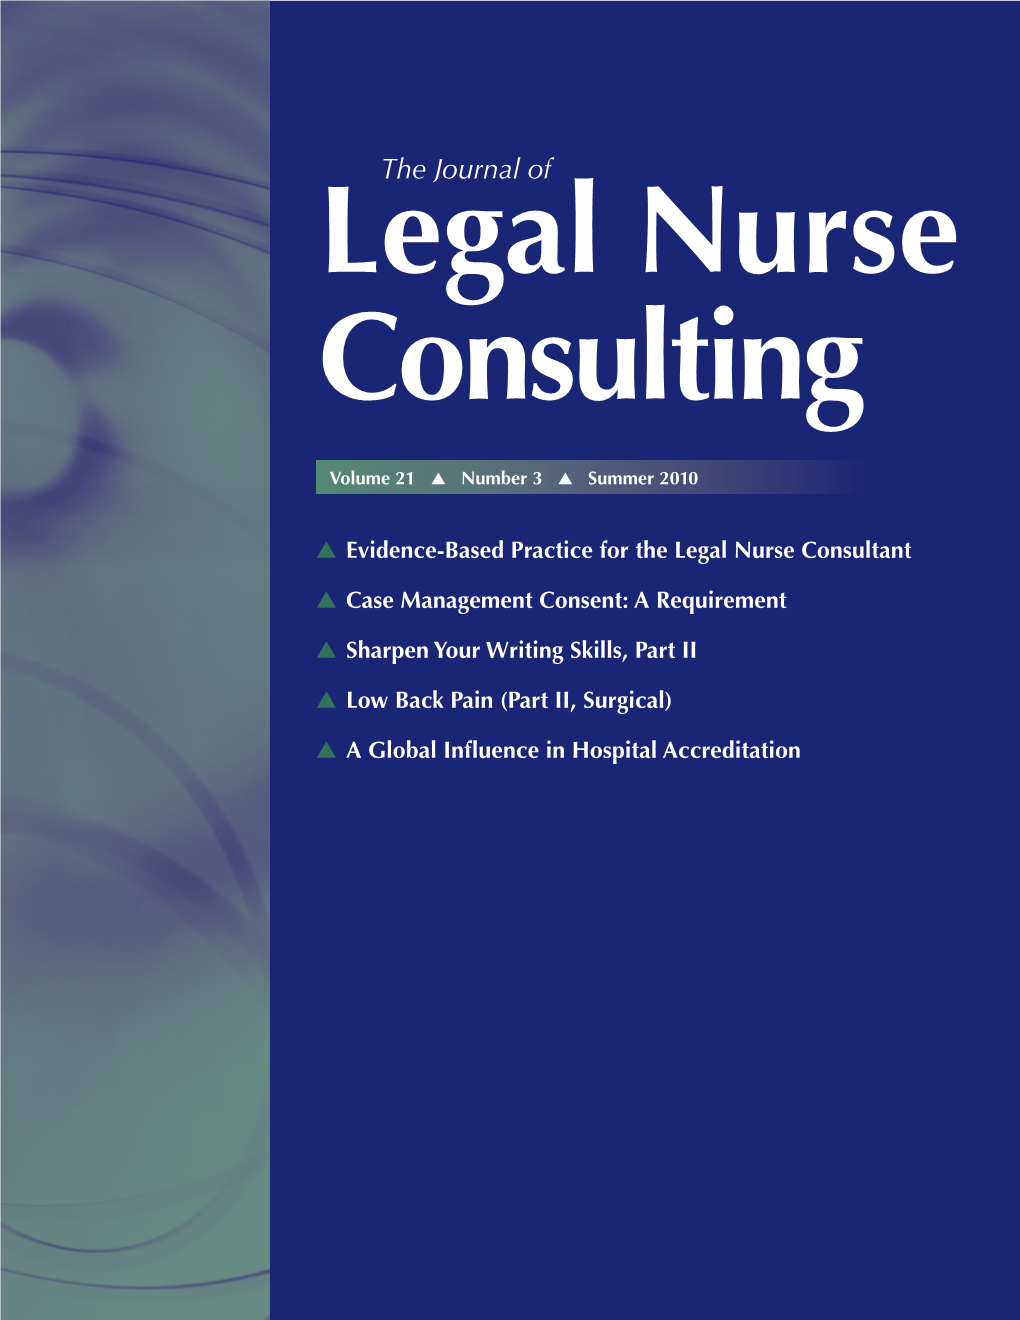 Evidence-Based Practice for the Legal Nurse Consultant